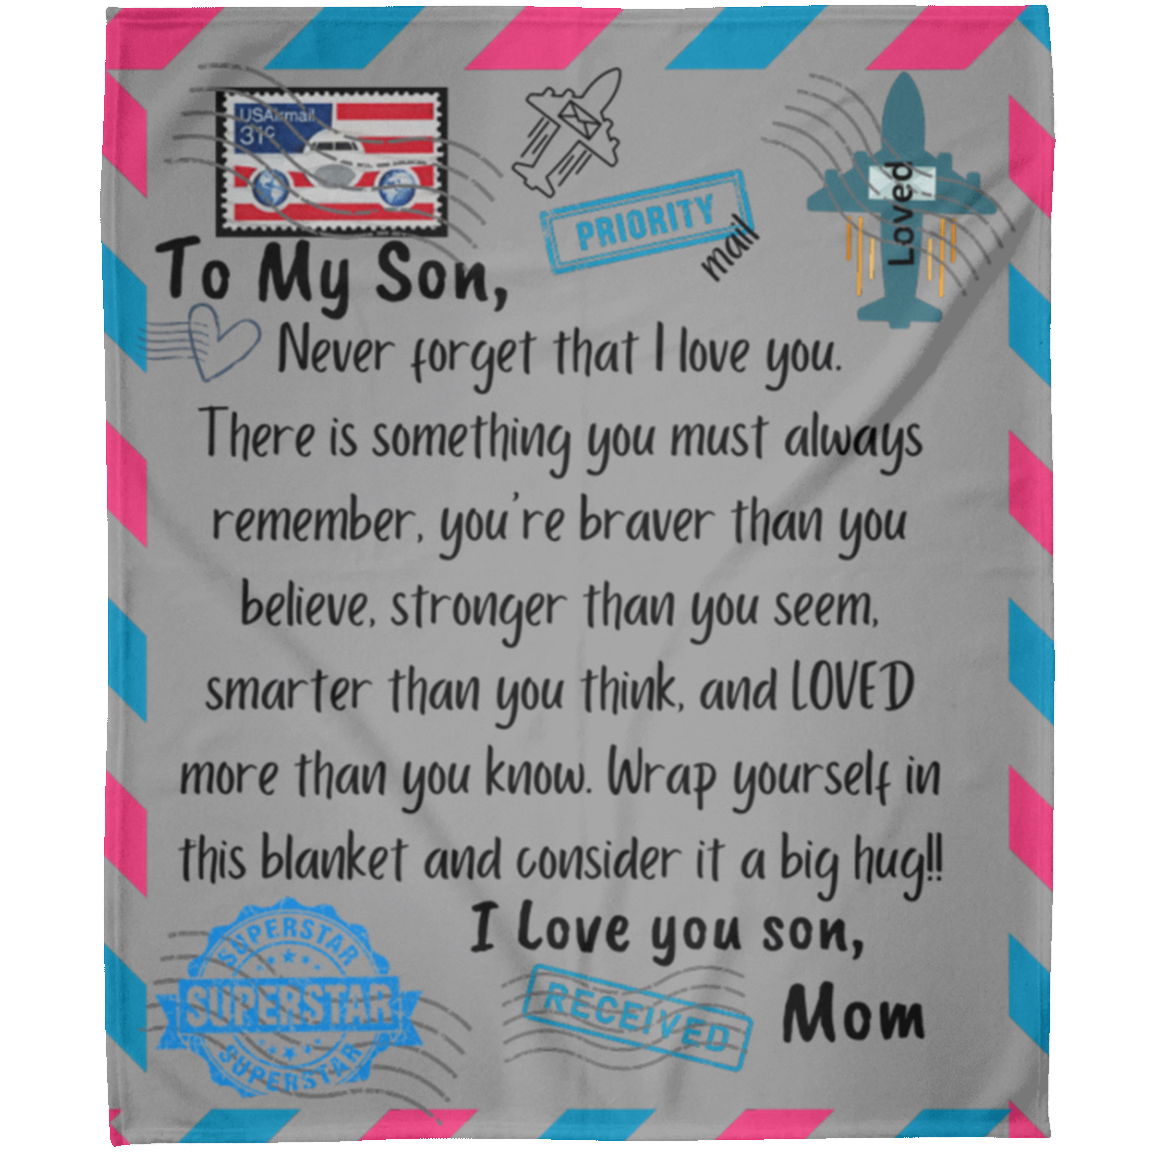 To My Son - Never Forget  (2) Fleece Blanket 50x60